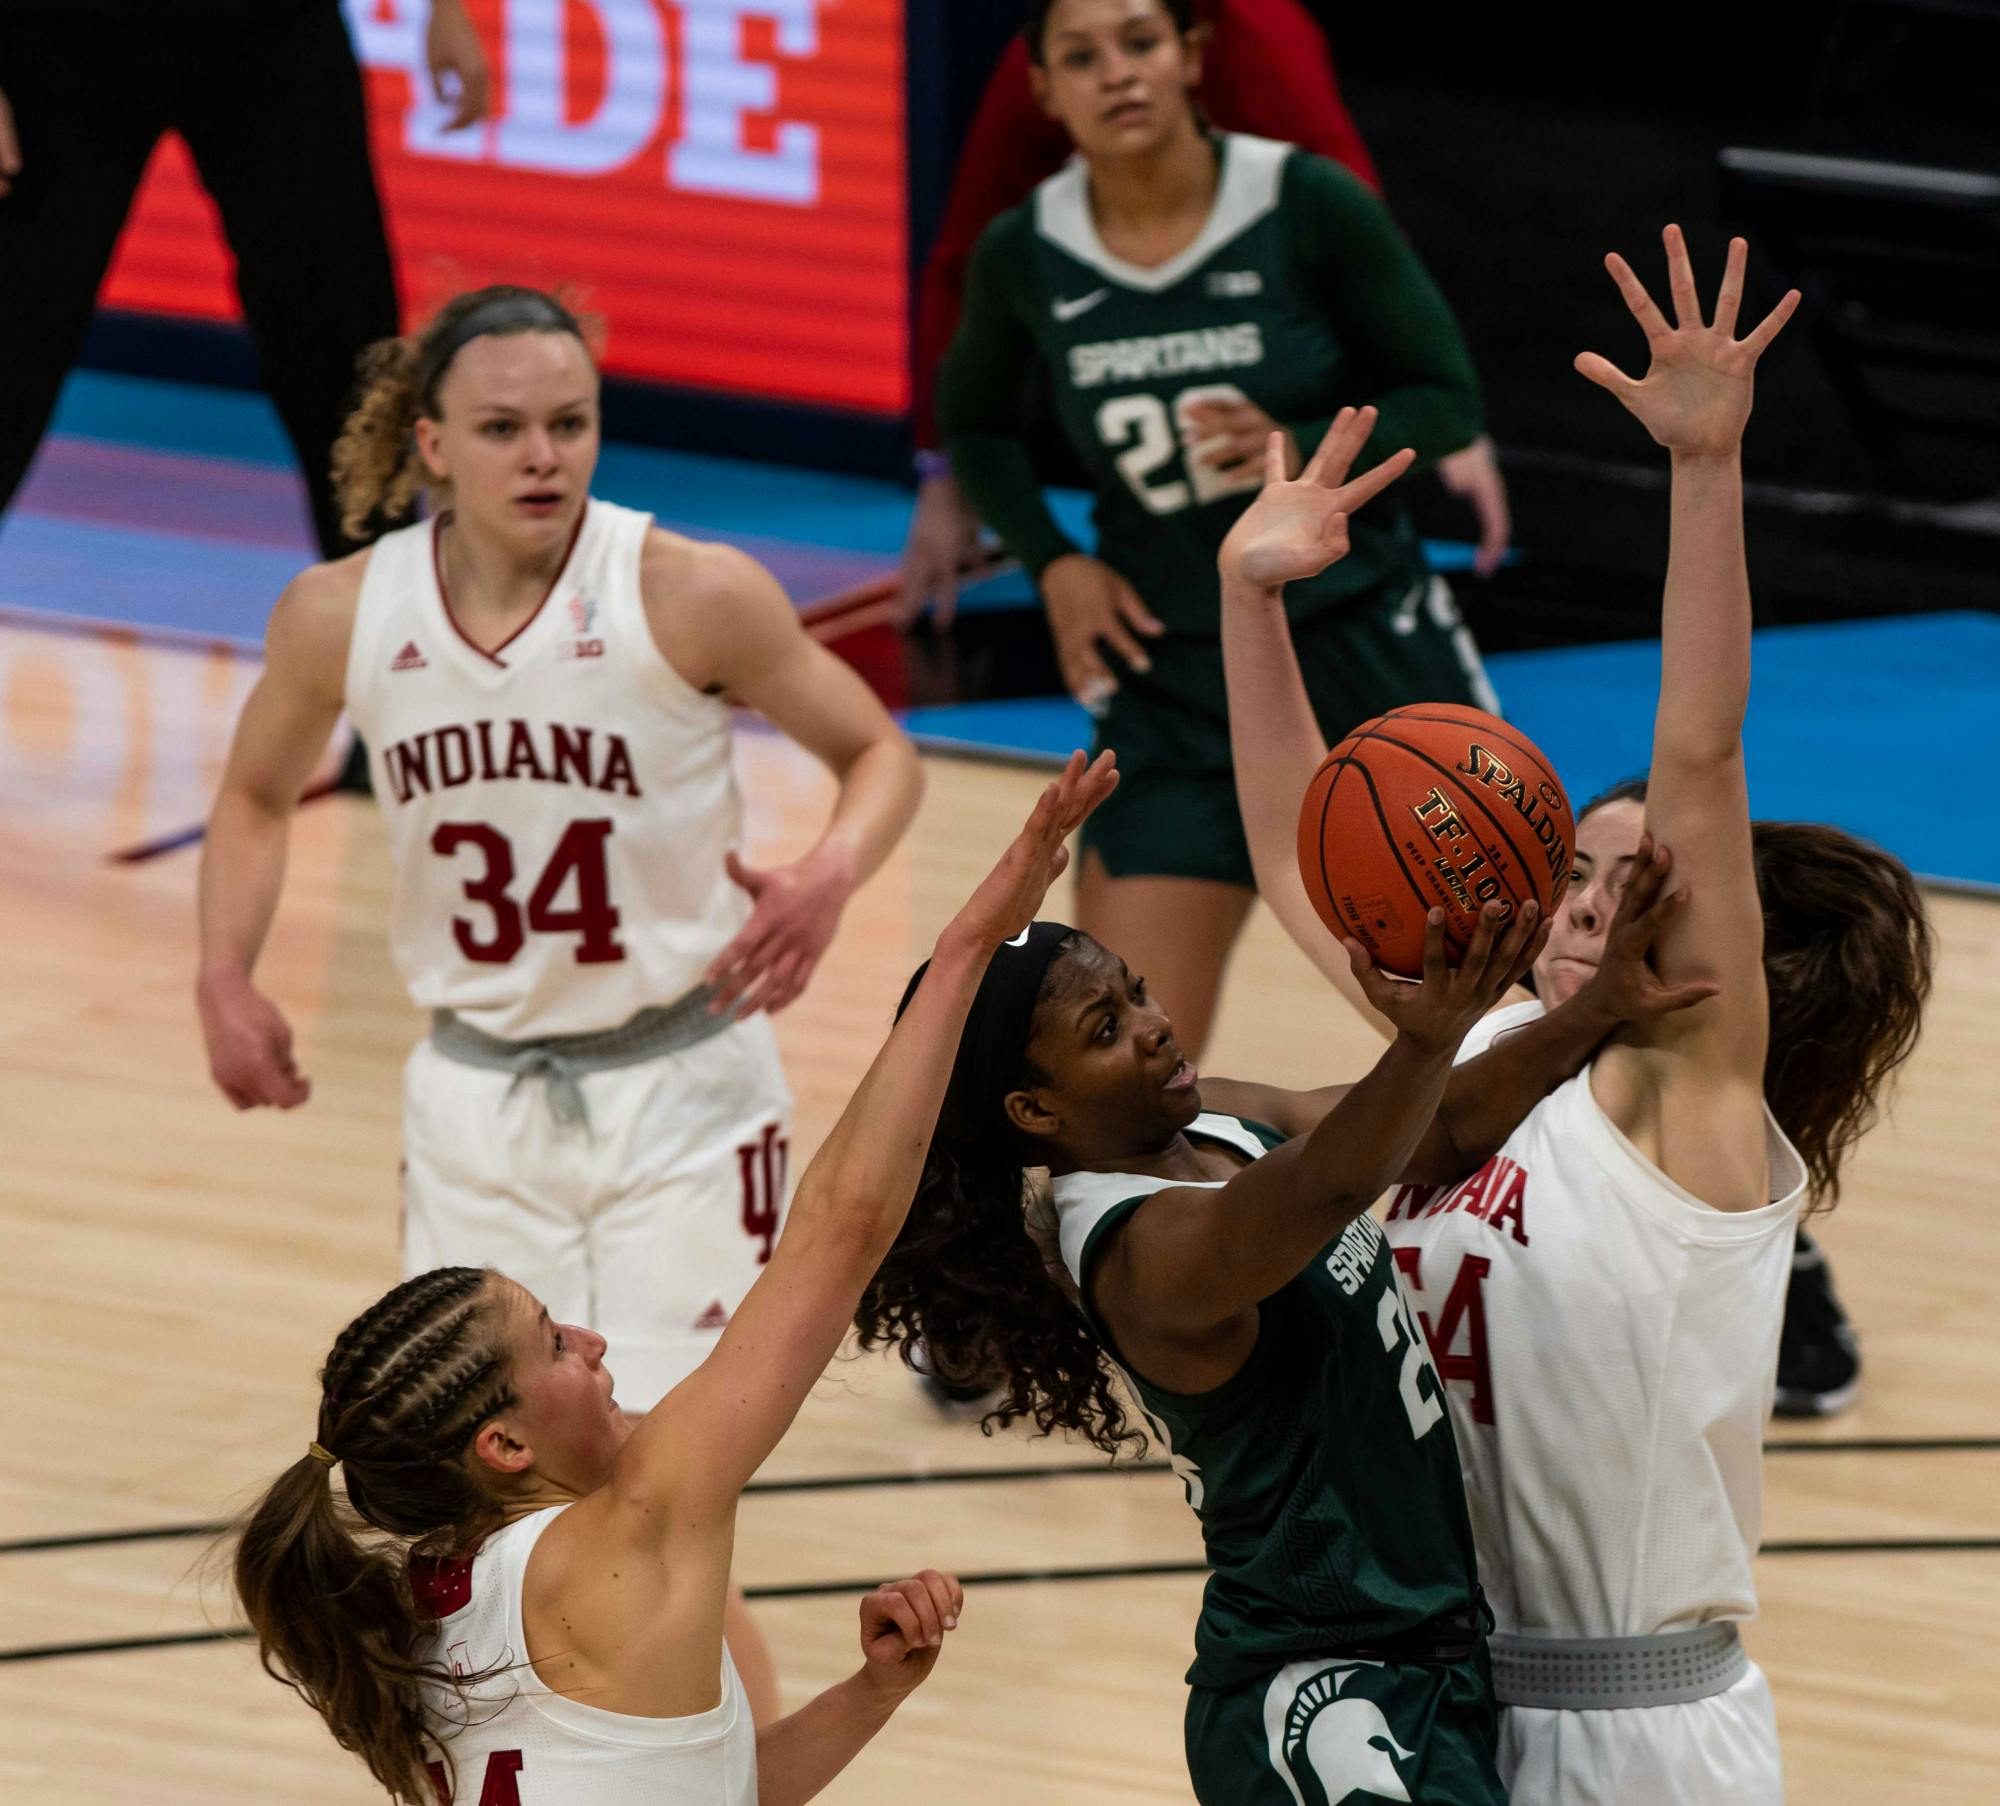 <p>Clouden fights off Indiana defenders to score during the second quarter. The Spartans will advance to the semifinals of the Big Ten Tournament after defeating the Hoosiers 69-61 at Bankers Life Fieldhouse. Shot on March 11, 2021.</p>